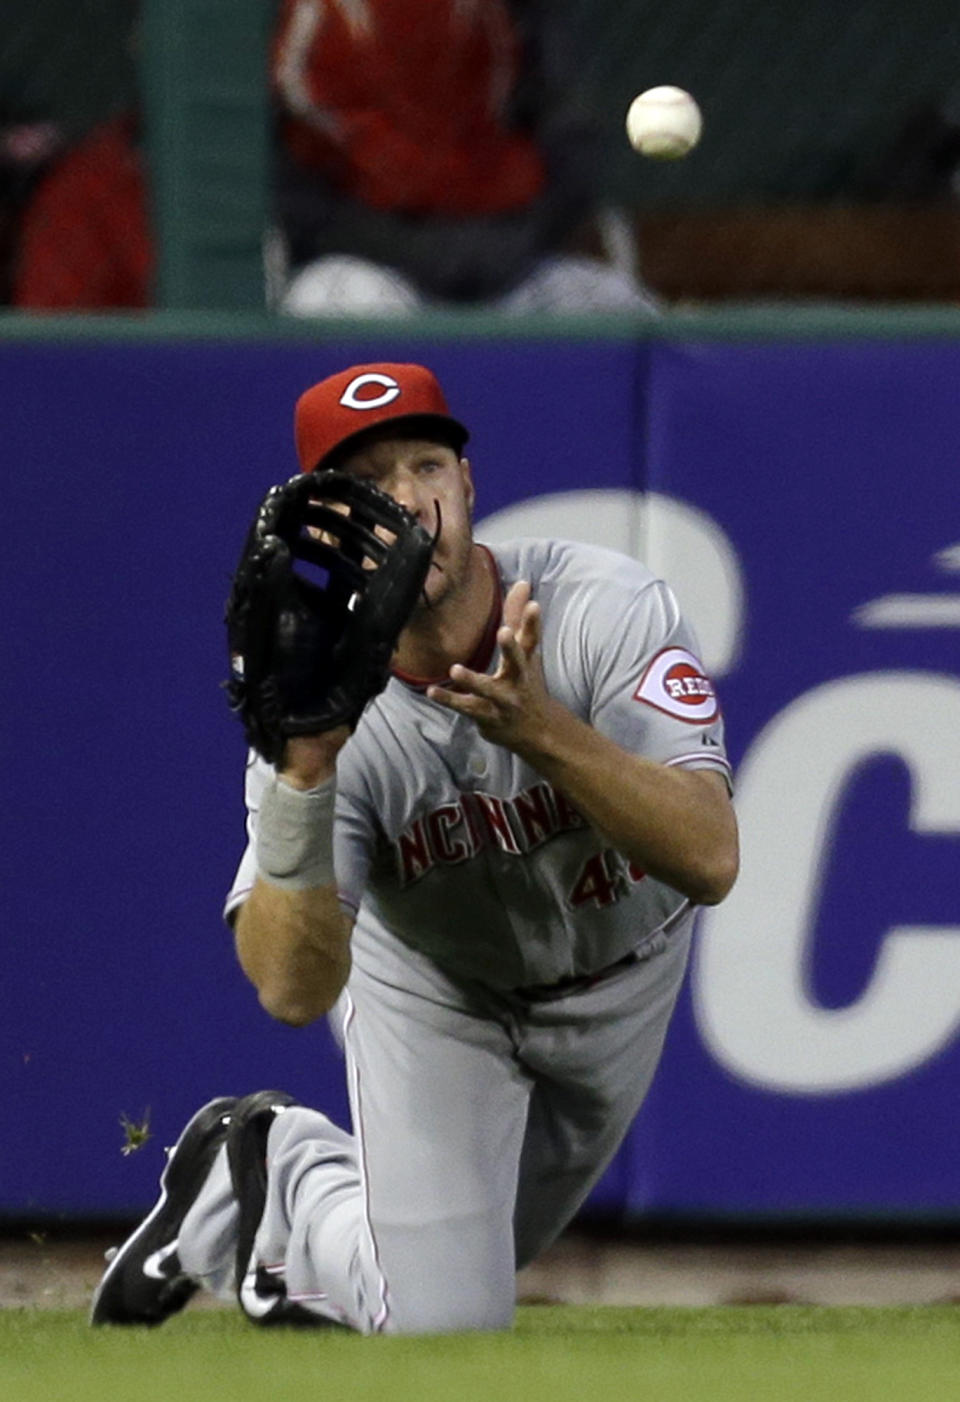 Cincinnati Reds left fielder Ryan Ludwick dives and catches a ball hit by St. Louis Cardinals' Matt Carpenter for an out during the first inning of a baseball game Tuesday, April 8, 2014, in St. Louis. (AP Photo/Jeff Roberson)